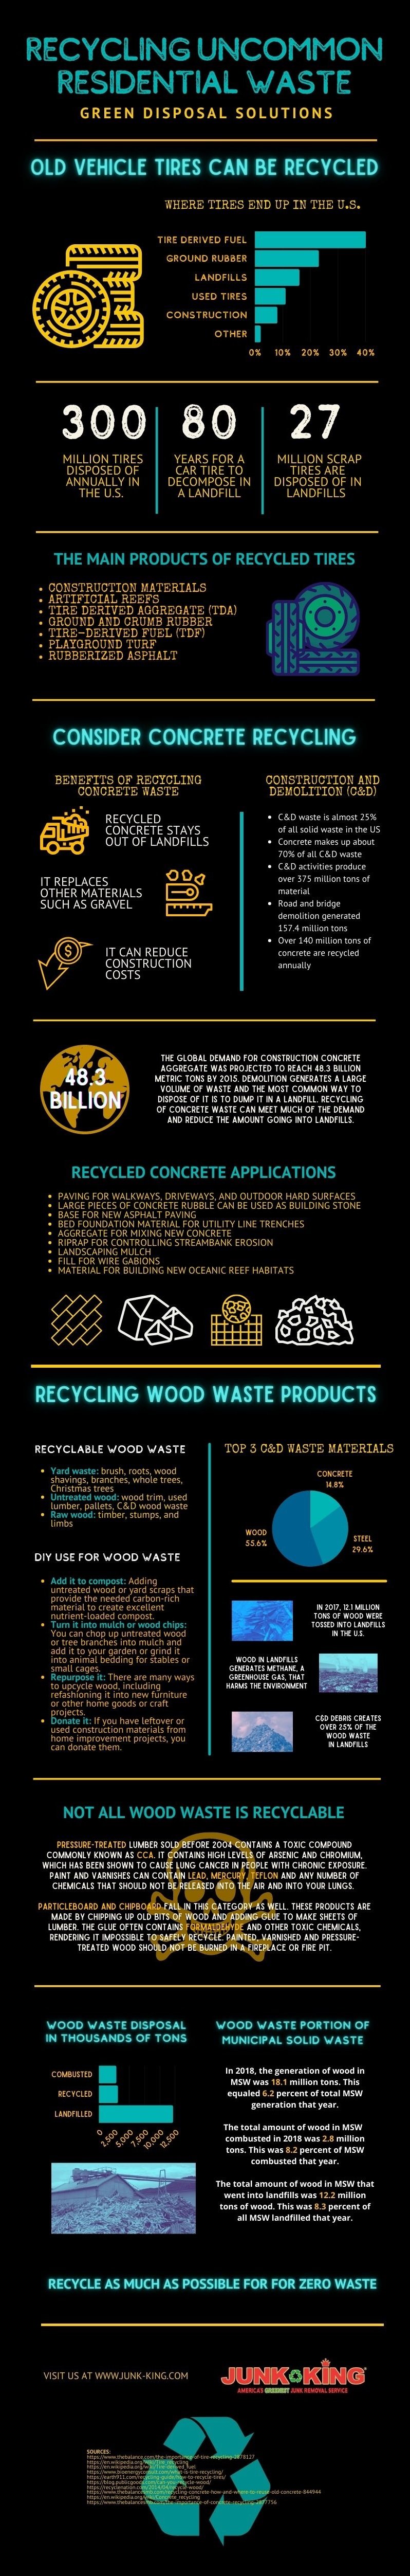 recycling-uncommon-residential-waste